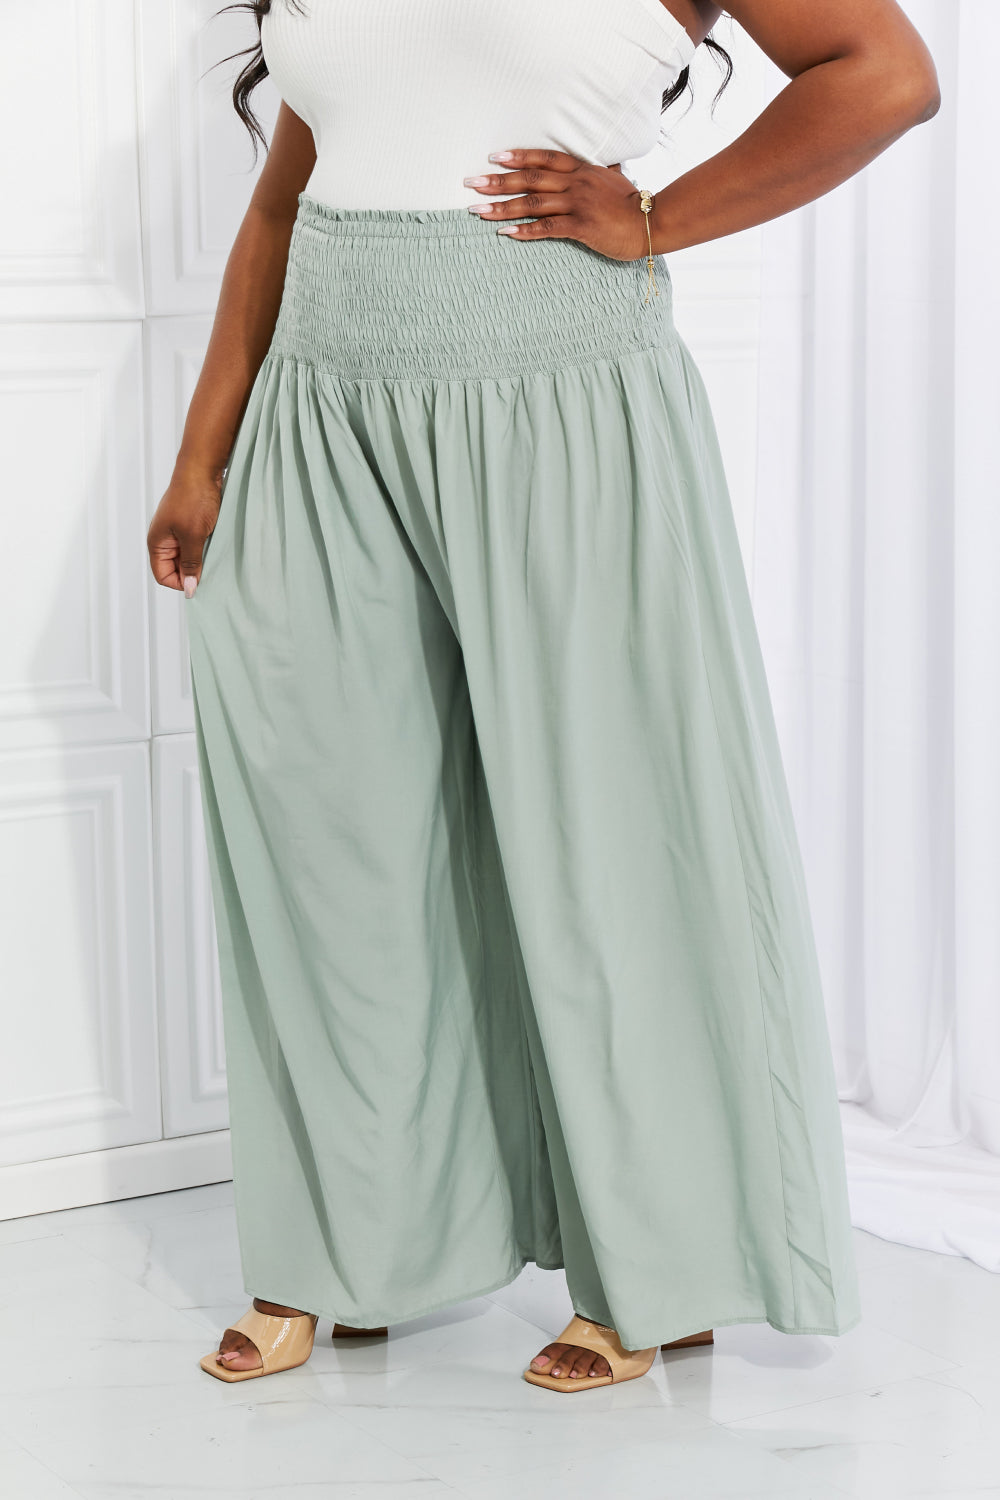 - HEYSON Full Size Beautiful You Smocked Palazzo Pants - Ships from The US - womens pants at TFC&H Co.